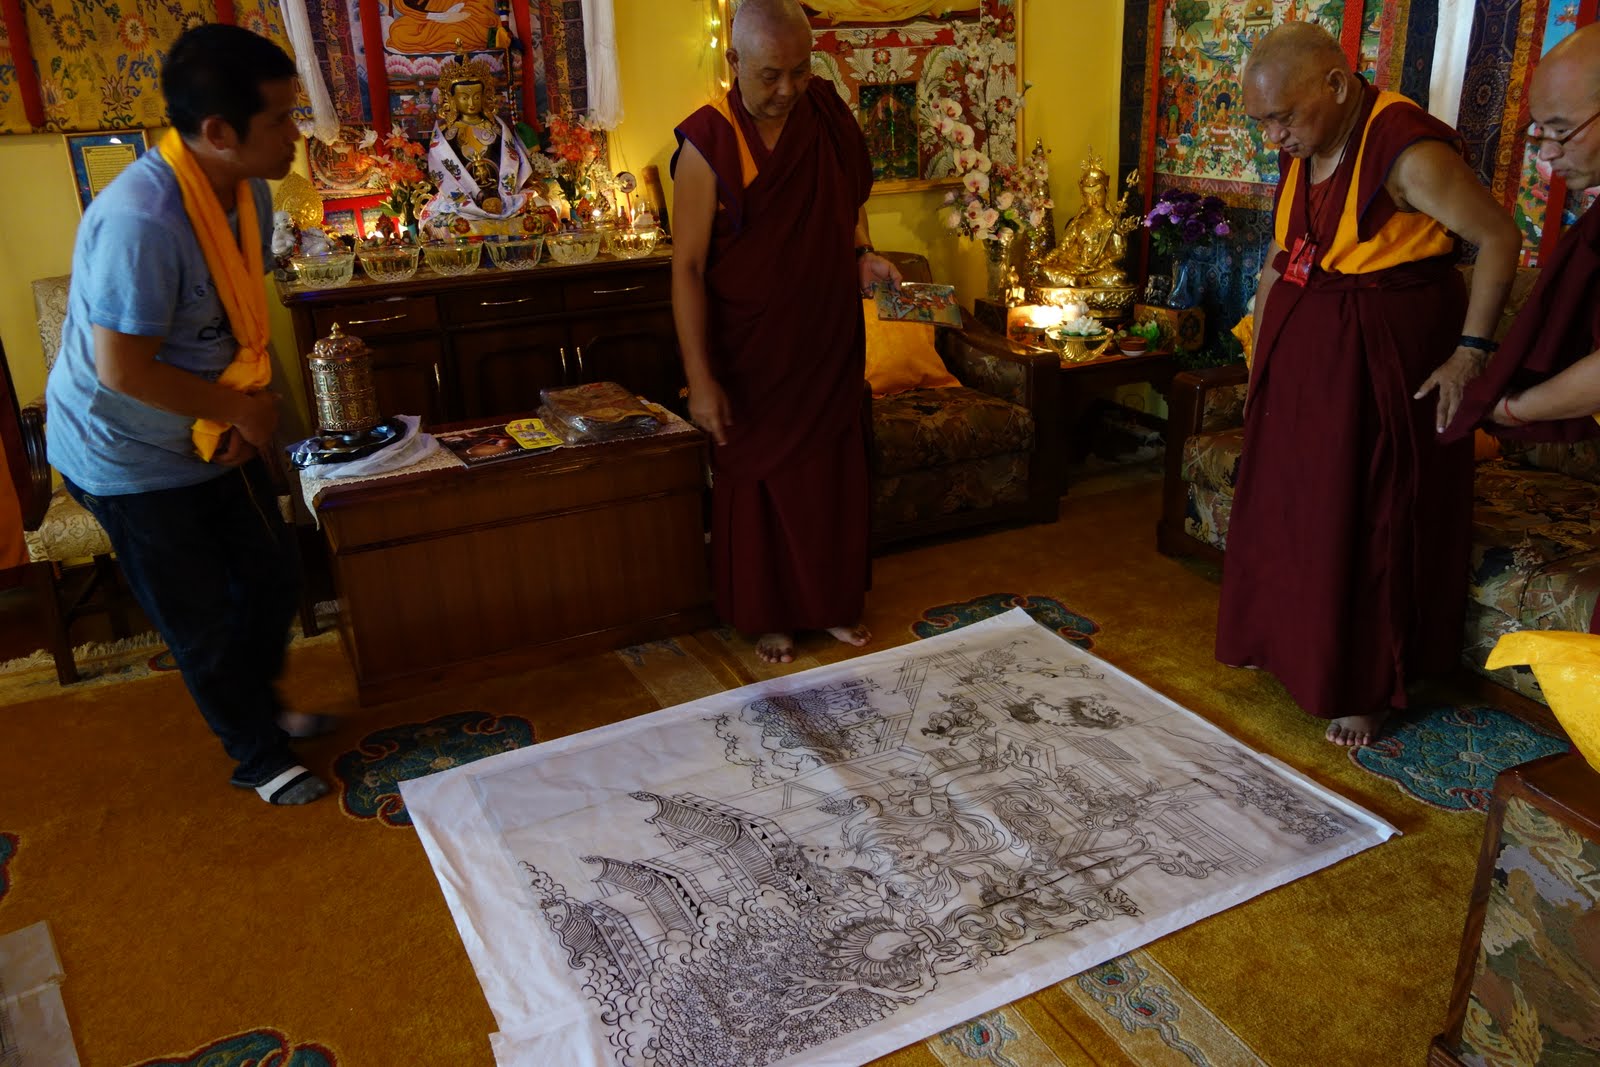 Rinpoche checking the art of thangkas he is having done: The Eight Fearless Taras and The Twenty-one Taras. Kopan Monastery, August 10, 2013 Photo: Ven. Roger Kunsang.